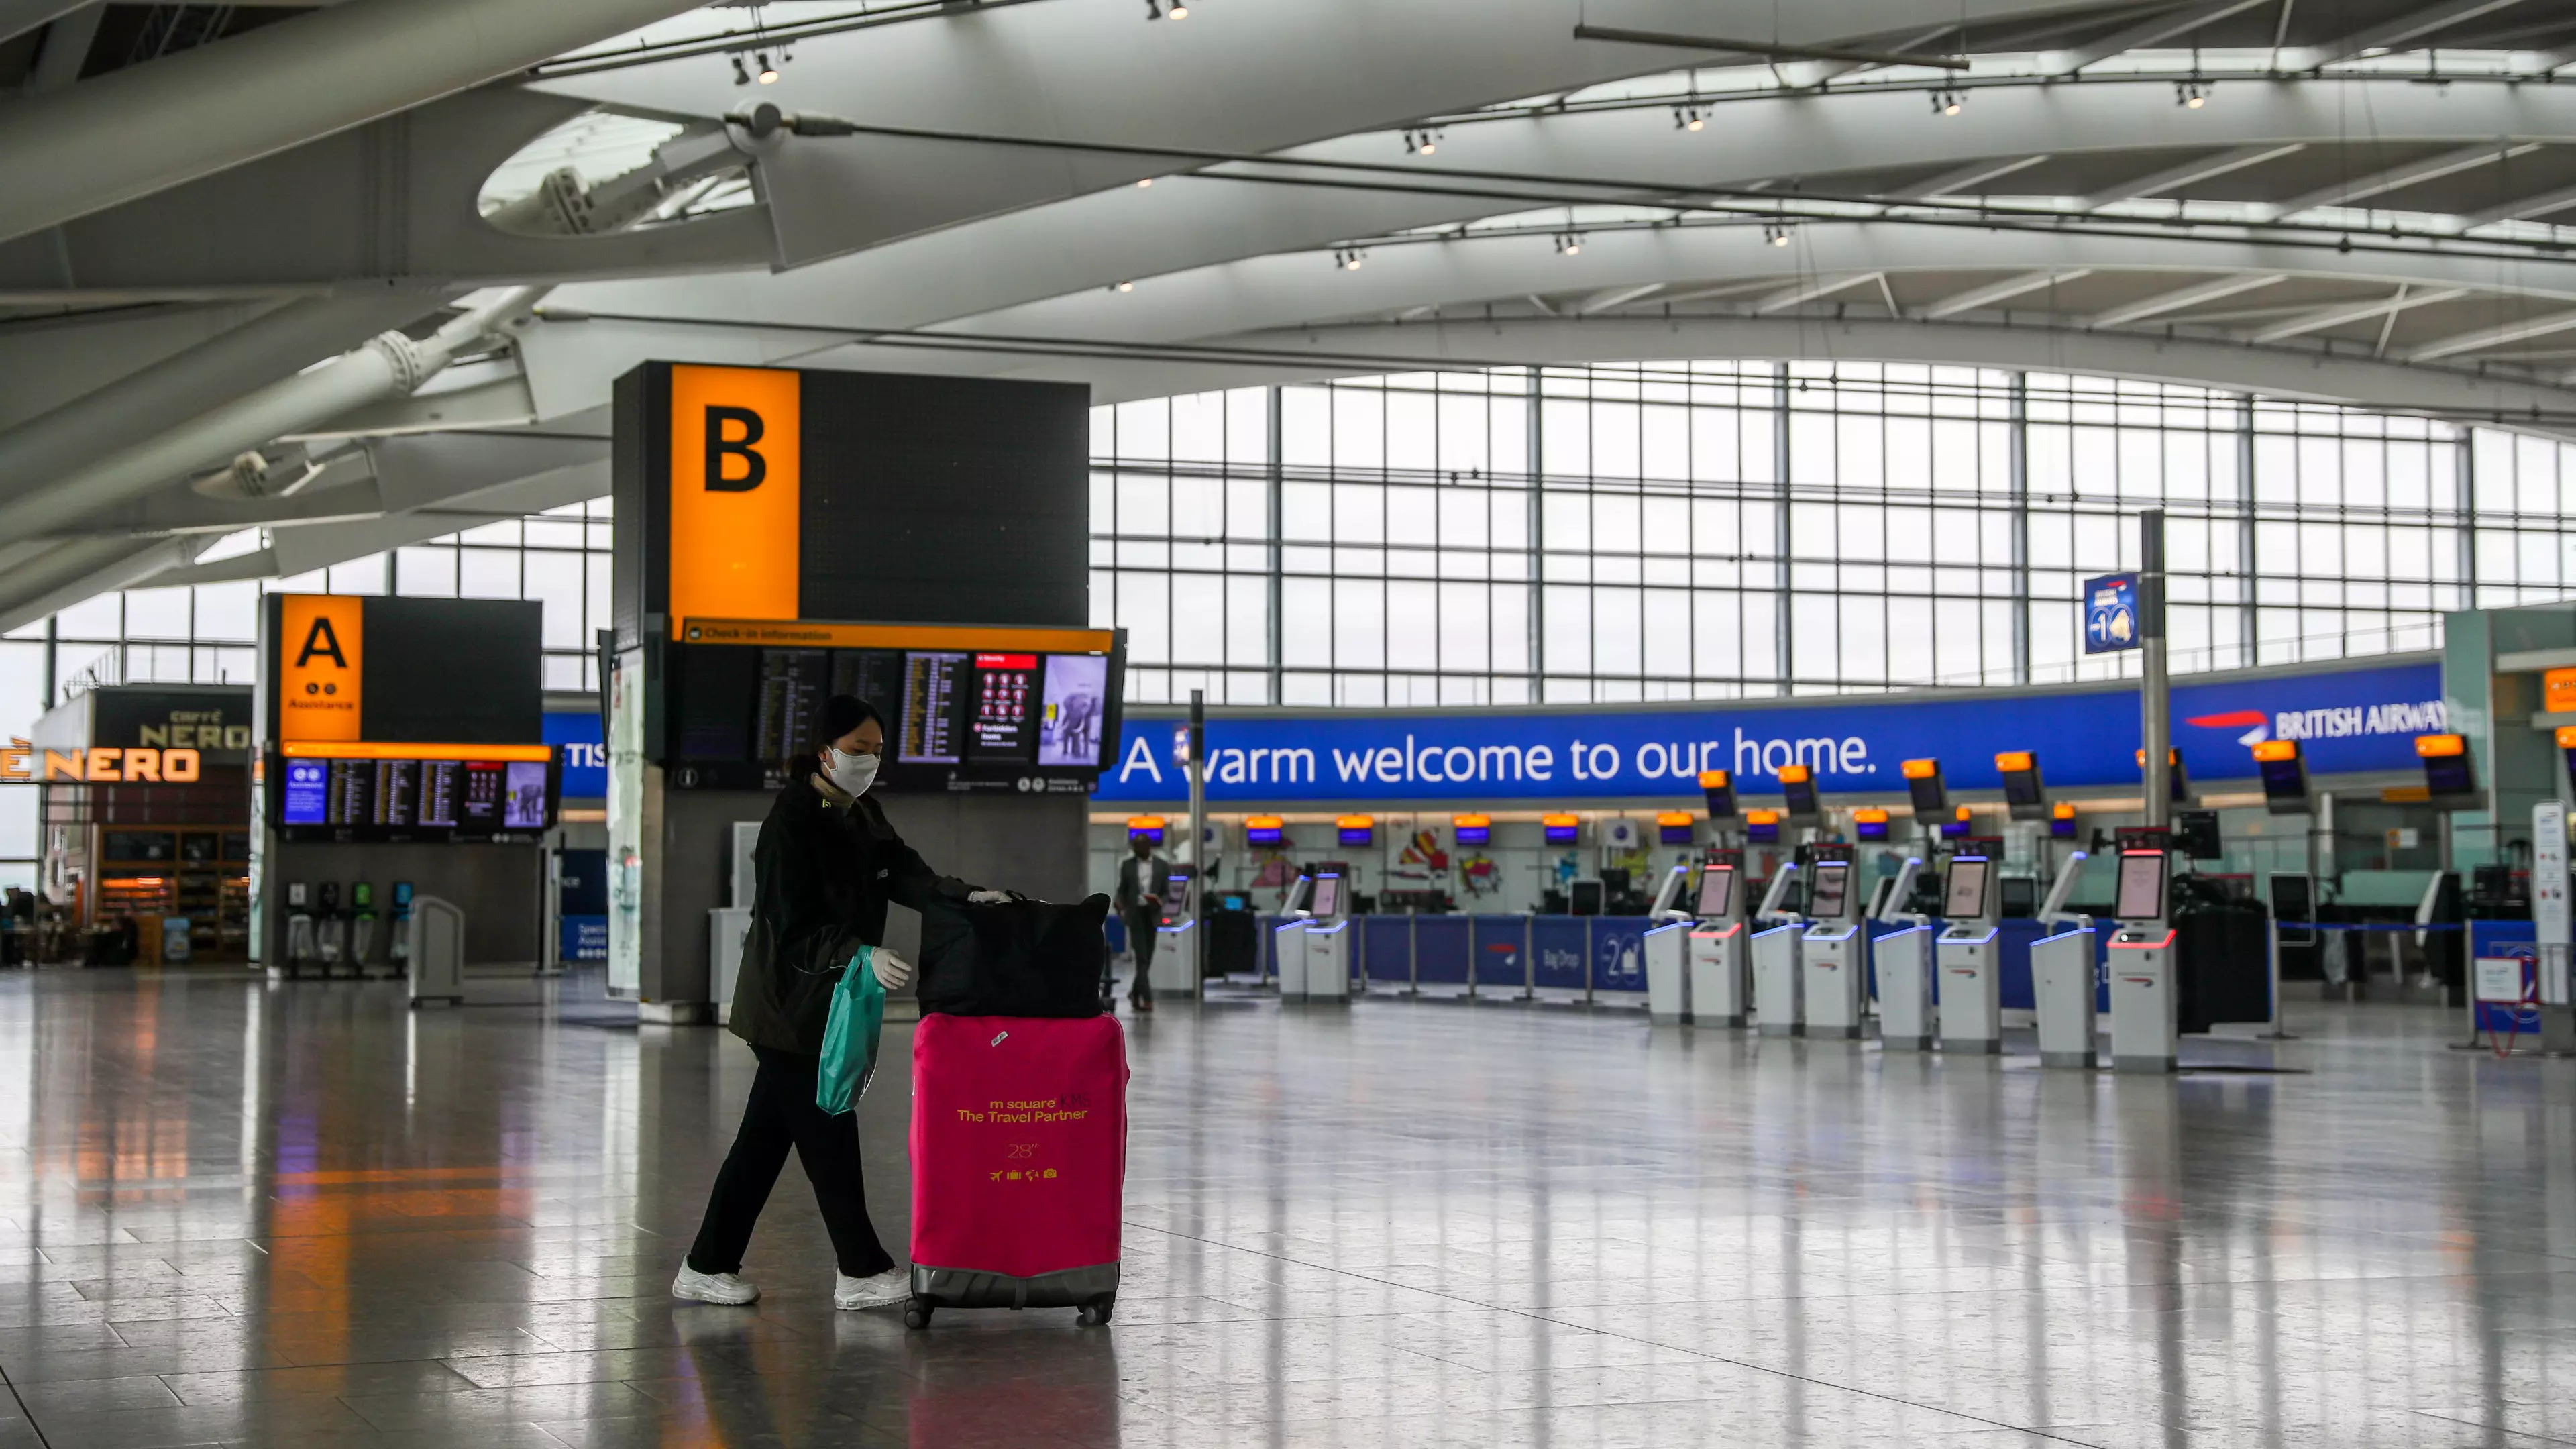 People Arriving In England From 'Low Risk' Countries Will Not Have To Quarantine